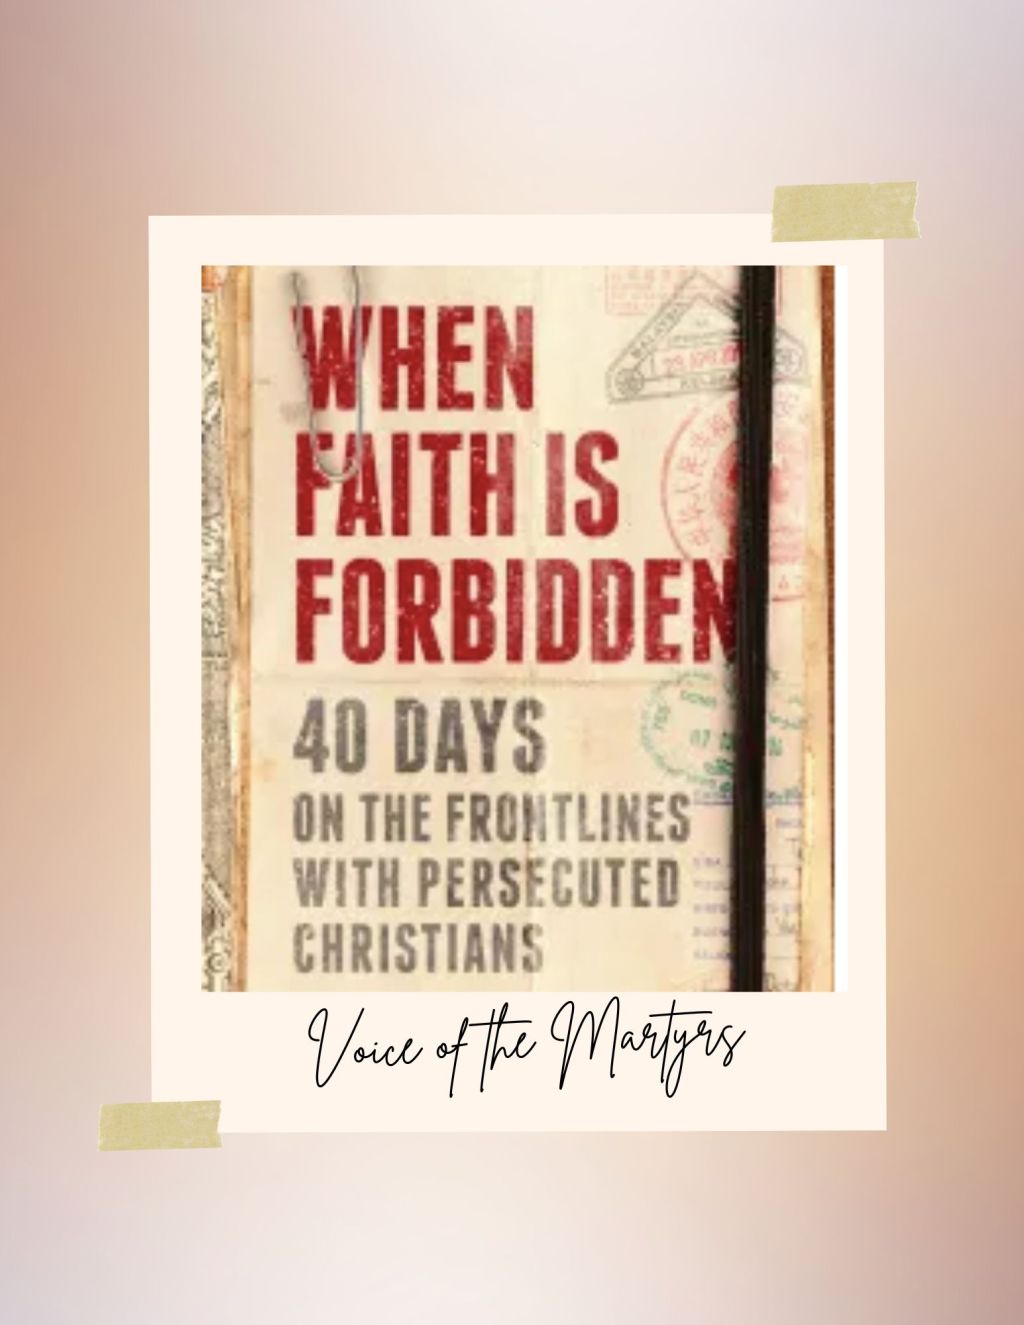 When Faith is Forbidden: 40 Days on the Frontlines with Persecuted Christians